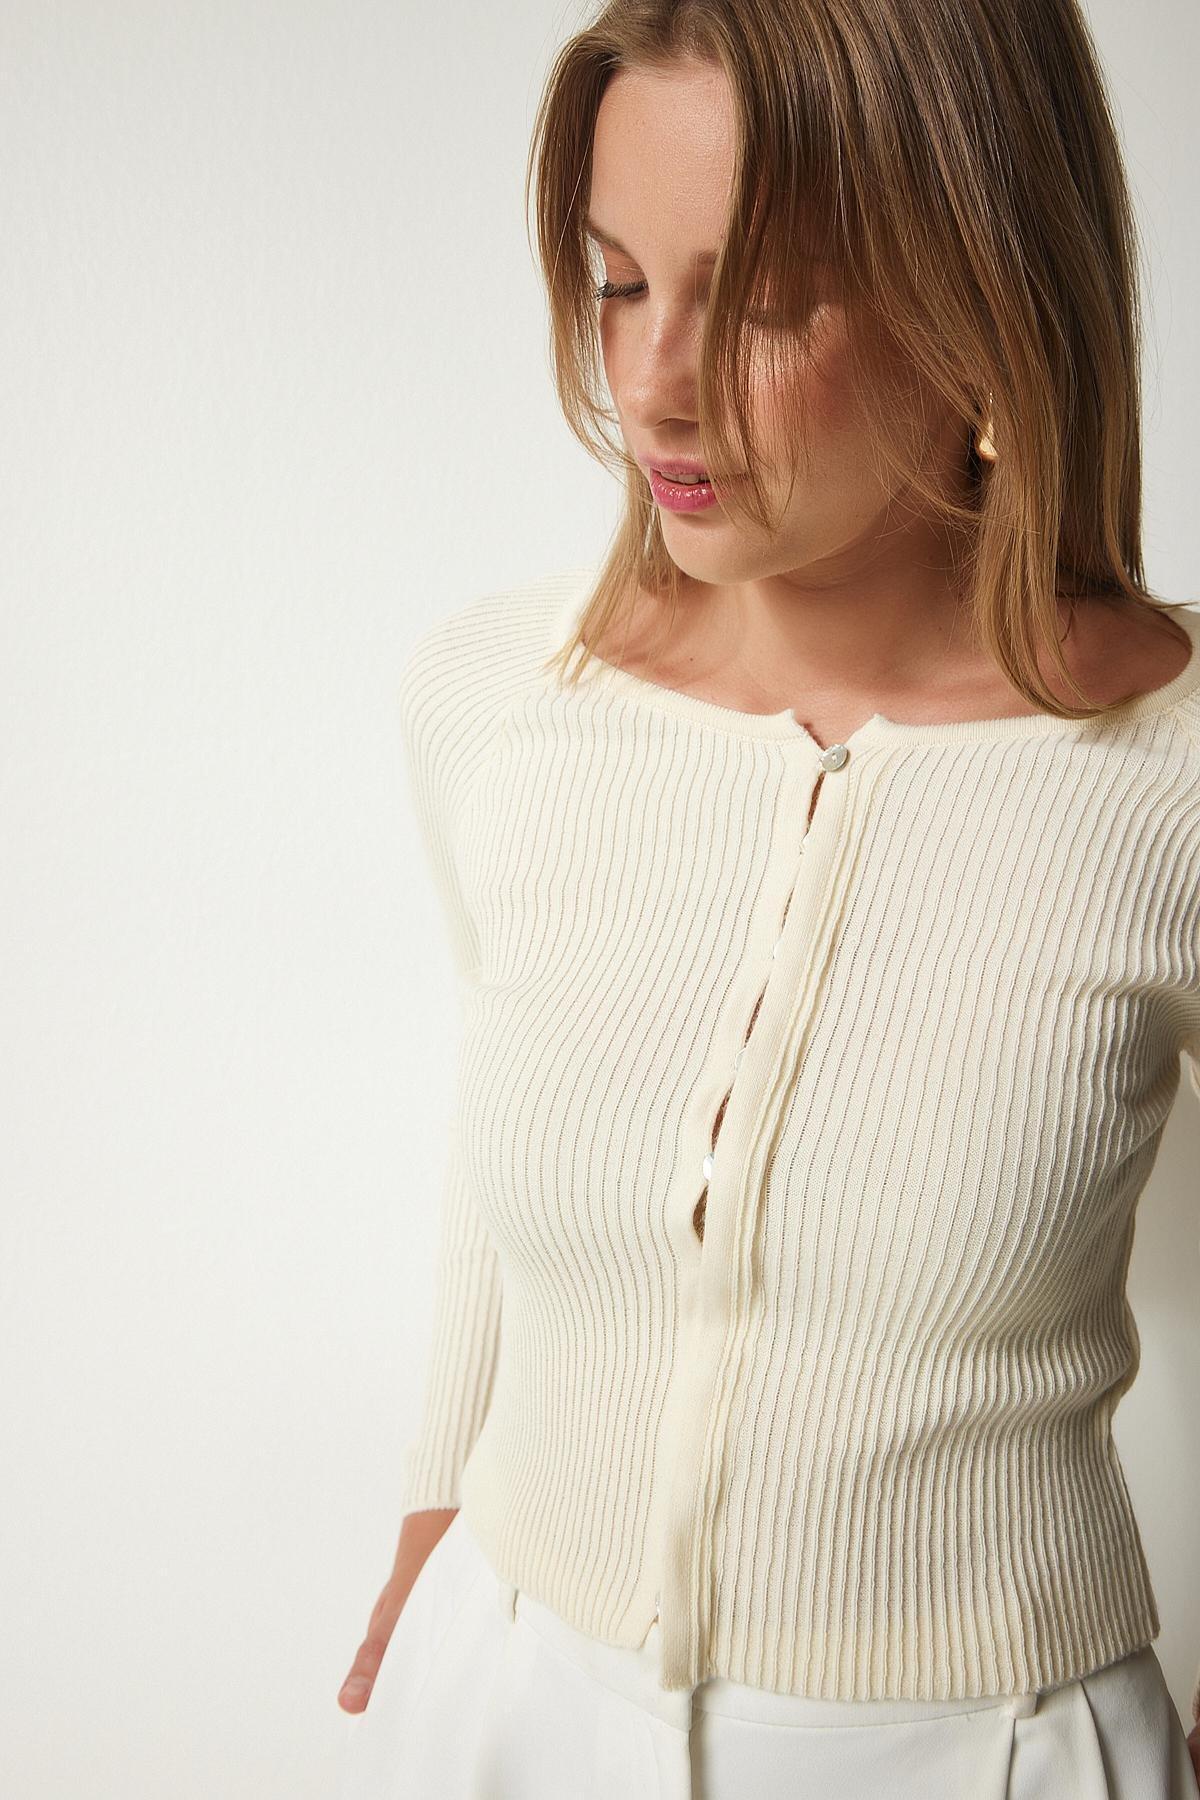 Happiness Istanbul - Cream Buttoned Ribbed Knitwear Cardigan